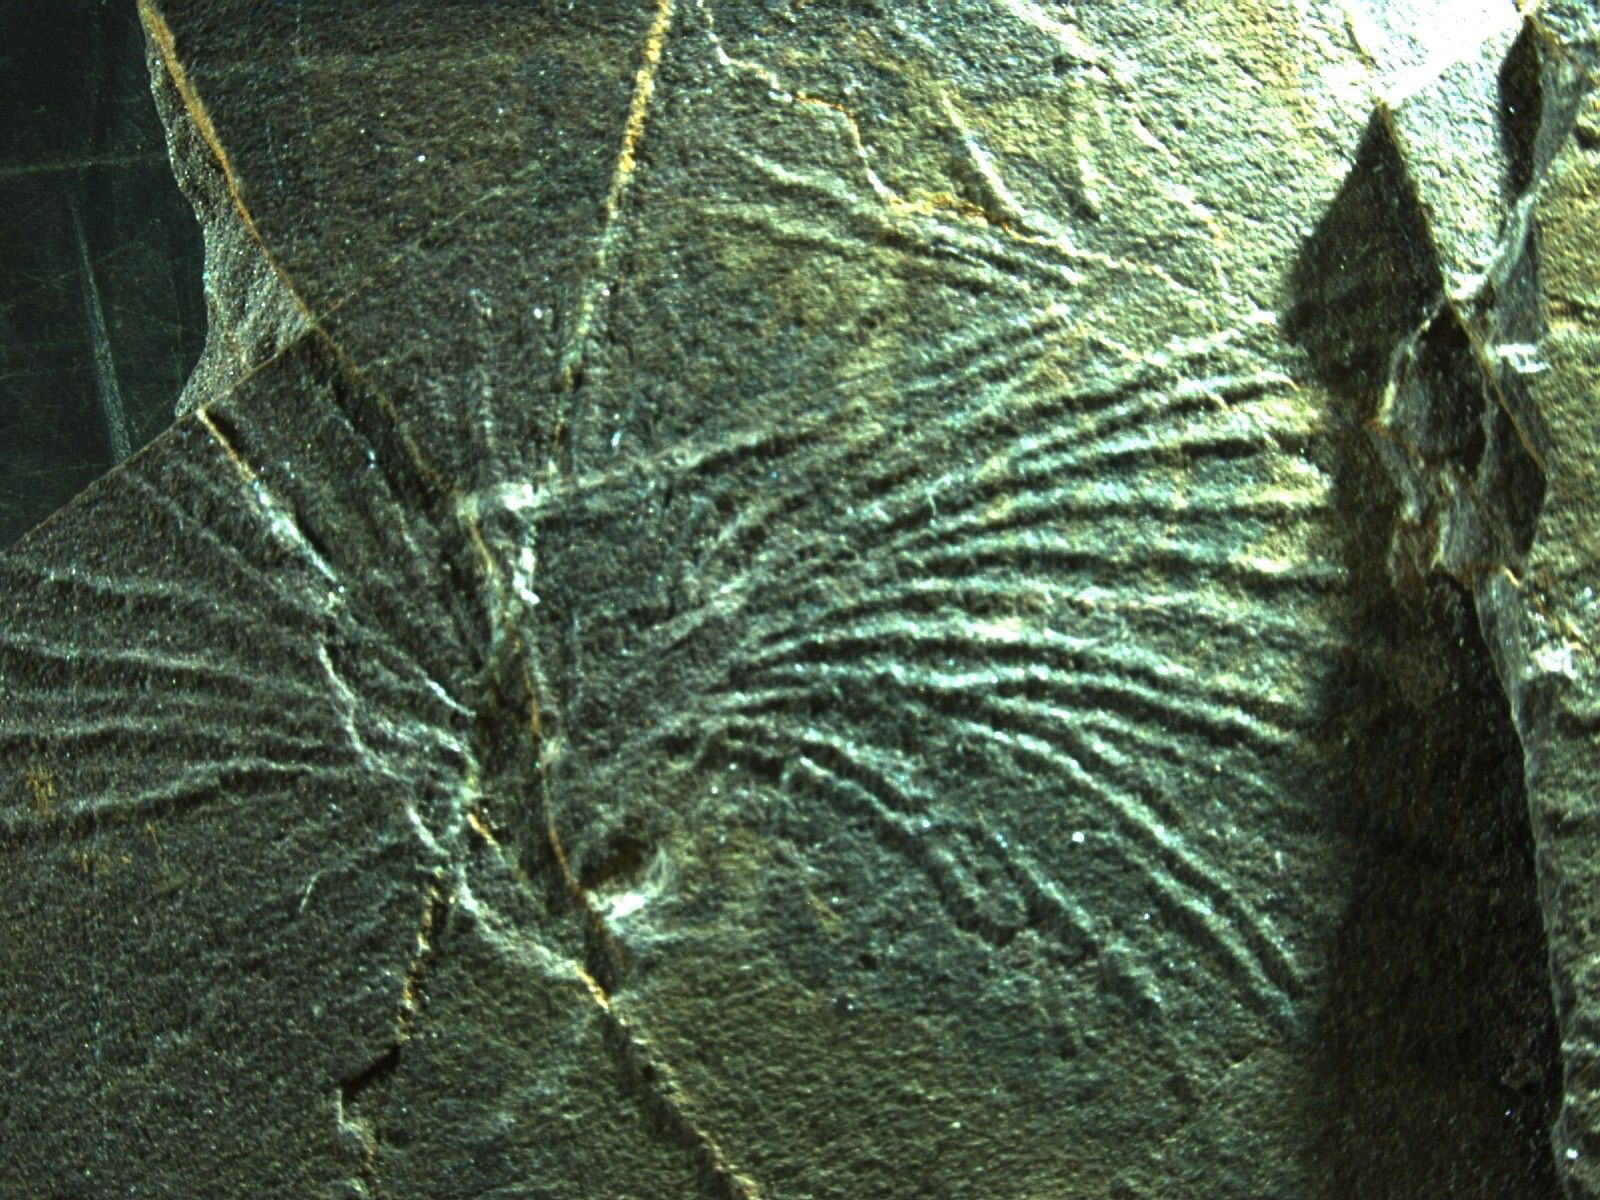 Photograph of the trace fossil Olhamia antique from the Cambrian of Maine. The photo shows a rock with thin ridges radiating from a central depression. There is no scale bar.